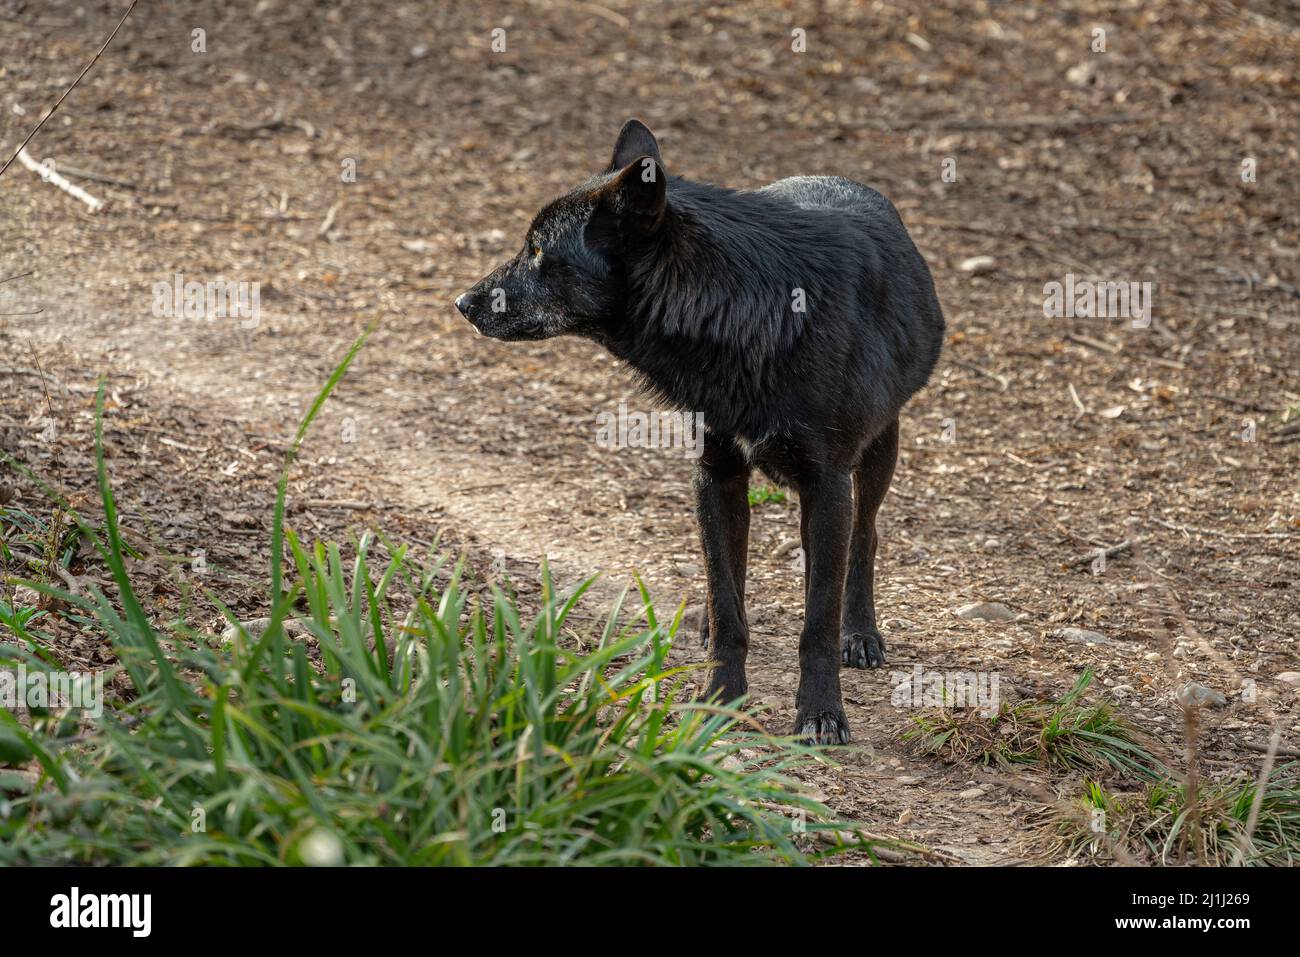 Black hybrid of Apennine wolf in the wildlife area of the Regional Reserve of Lake Penne. Oasis WWF, Penne, Pescara province, Abruzzo, Italy, Europe Stock Photo